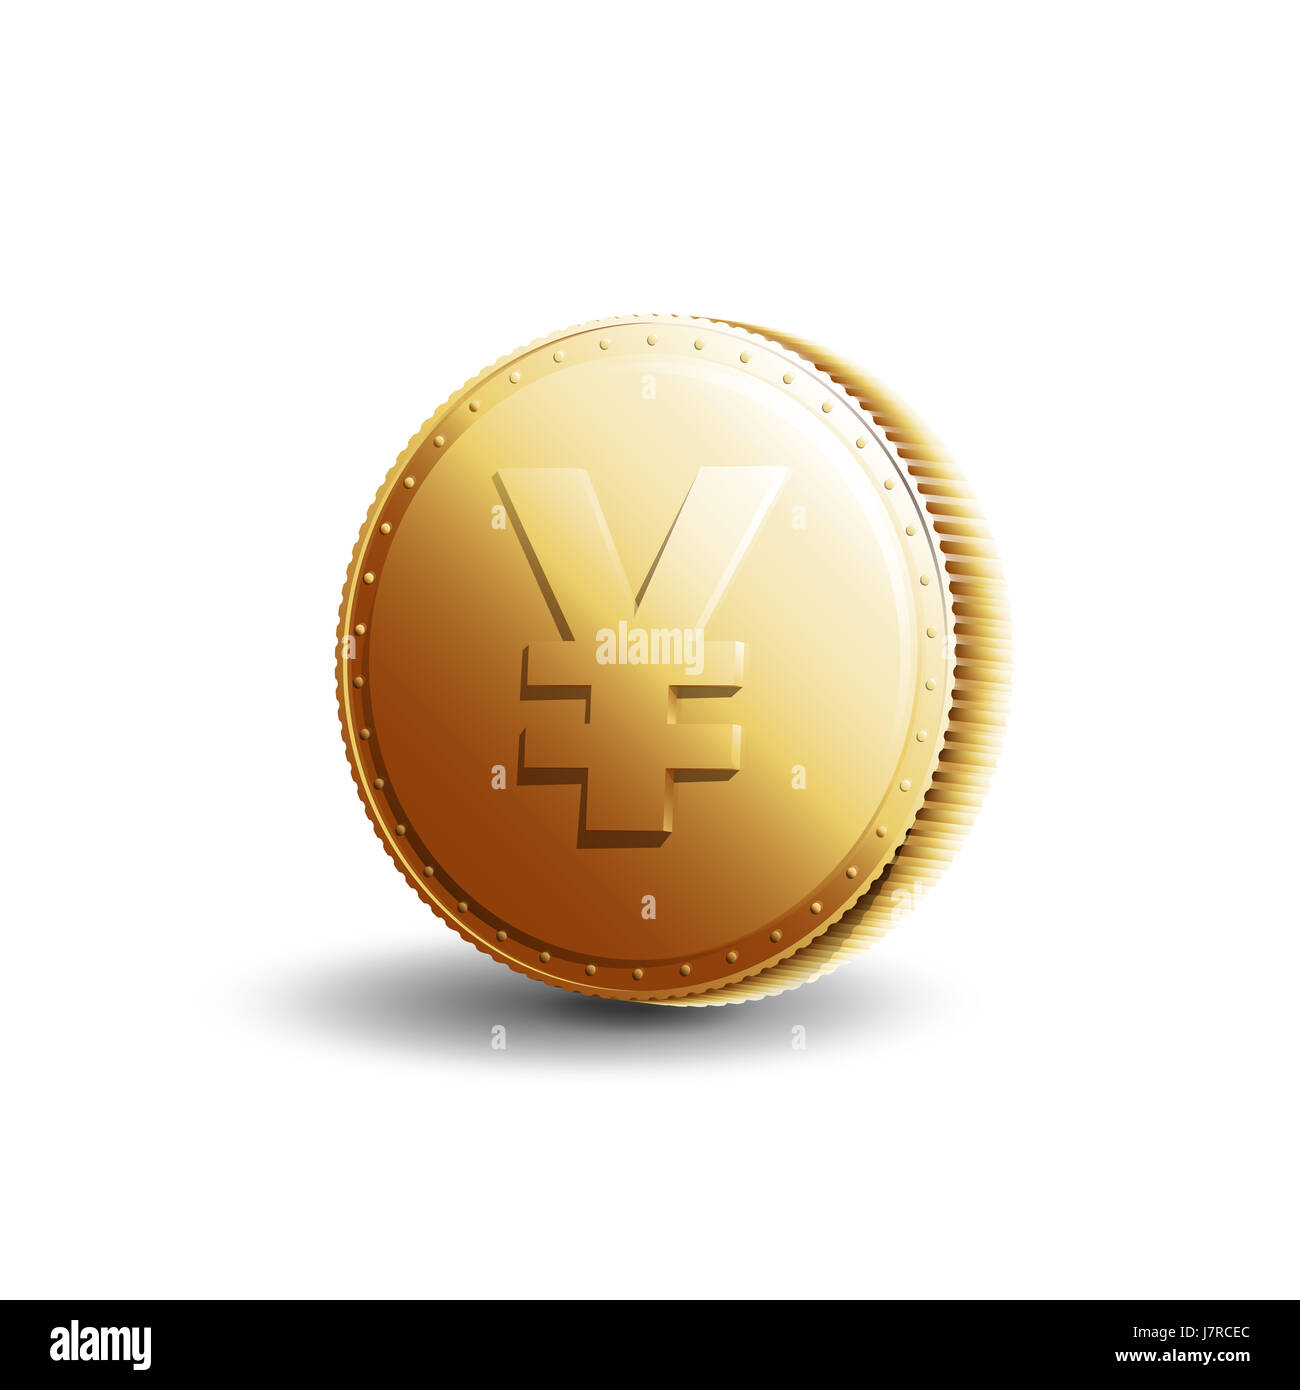 Japanese currency. Gold coin with yen sign isolated on white background. Stock Photo